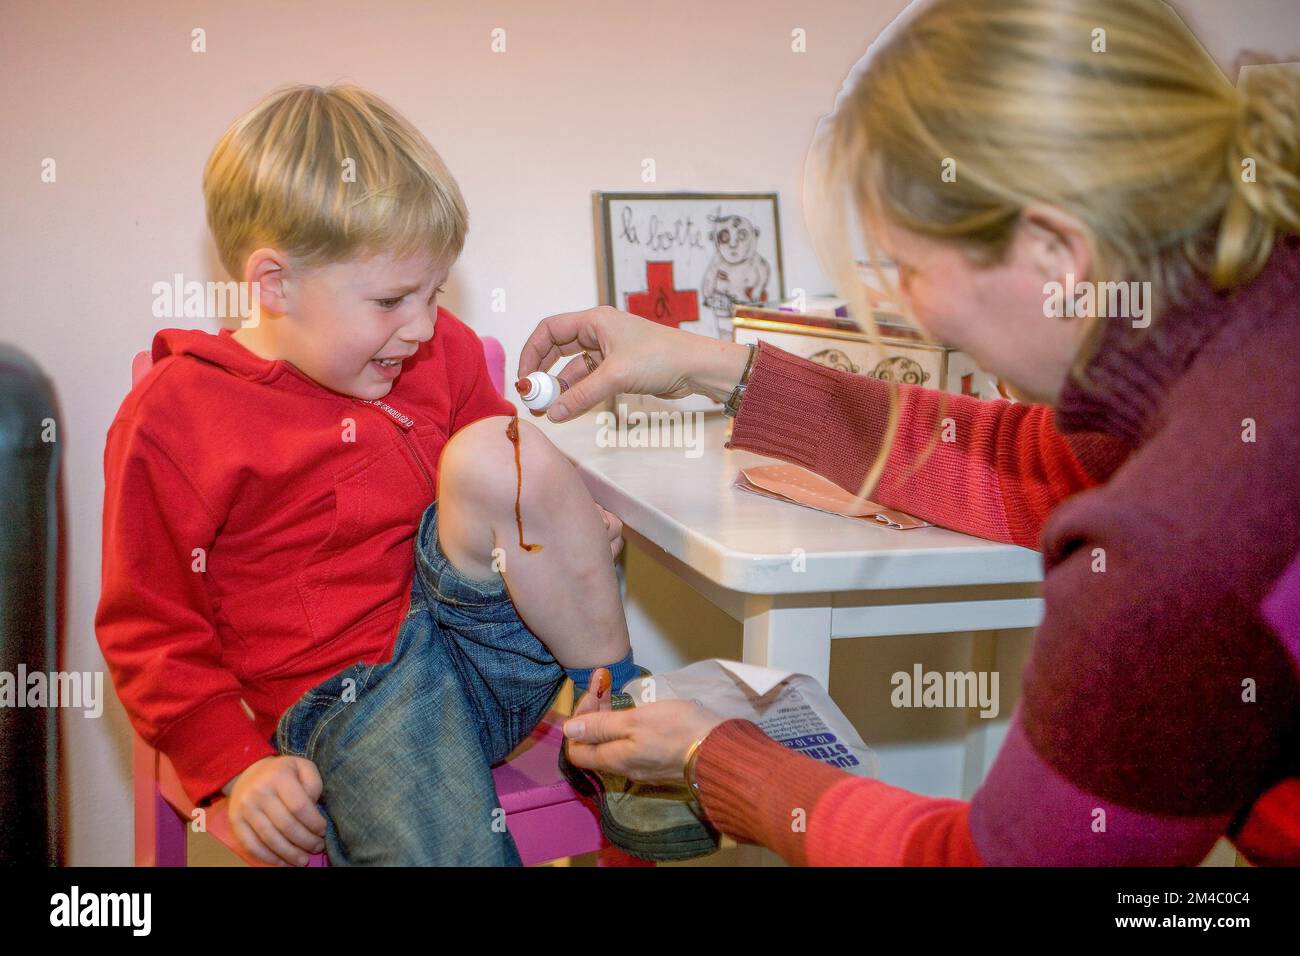 Netherlands, Arnhem; Mother puts iodine on the injured knee of her crying son. Stock Photo